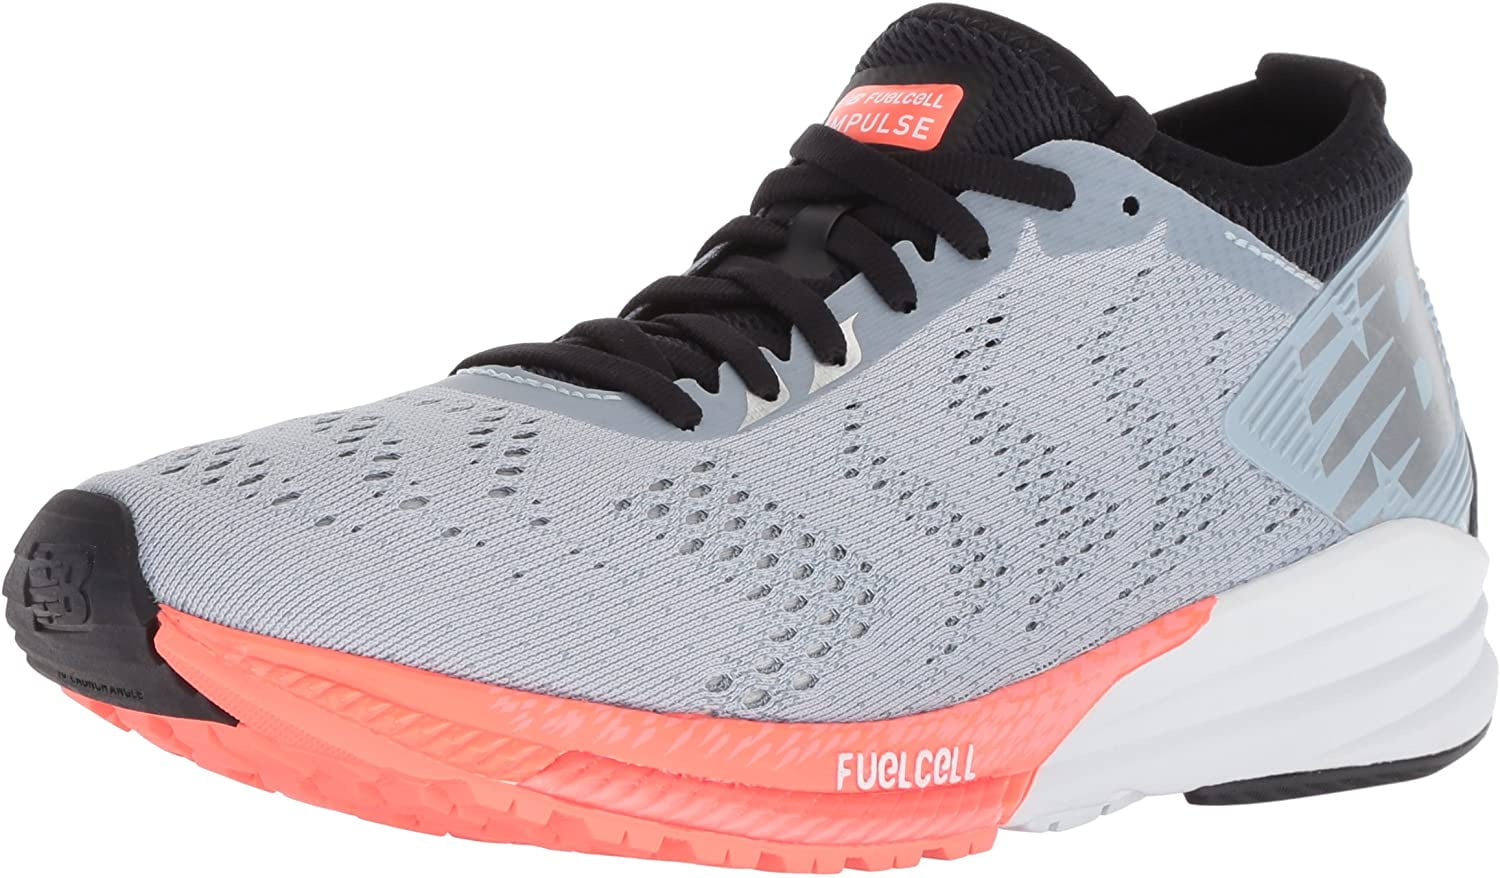 New Women's FuelCell Running Shoes with Orange -